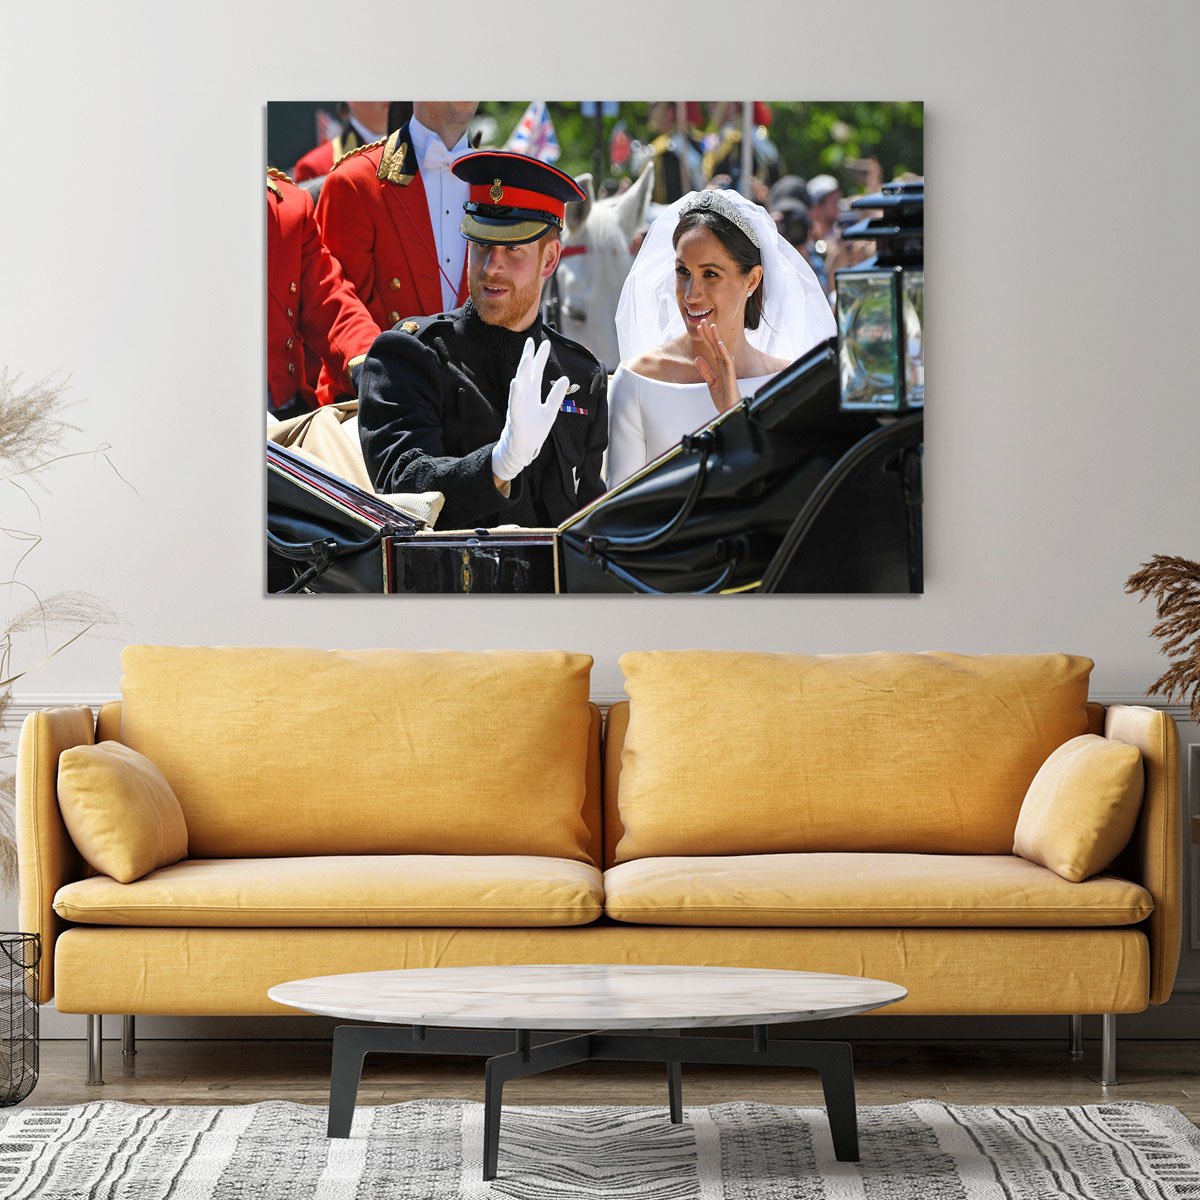 Meghan and Prince Harry greet the crowds Canvas Print or Poster